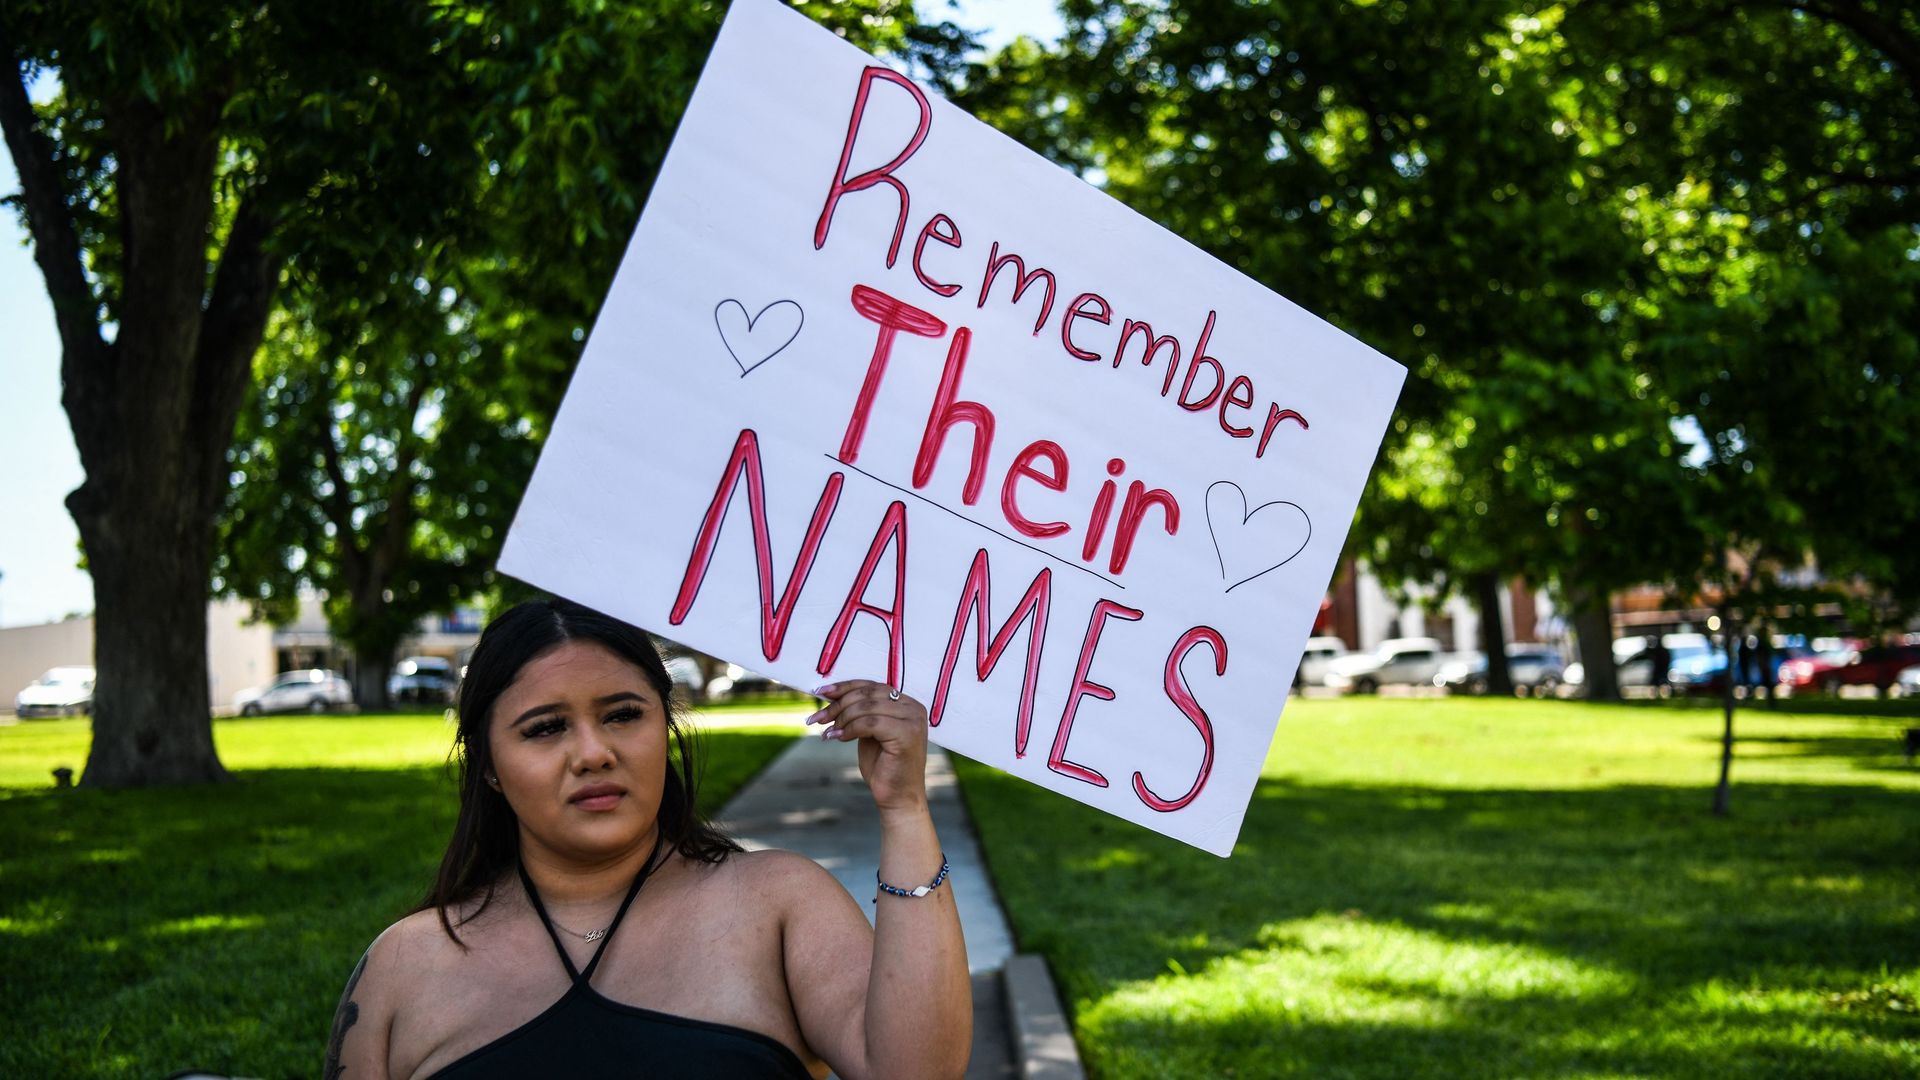 A woman in Uvalde, Texas, holds a sign that reads "remember their names" written in red, after the shooting there that left 19 kids and two teachers dead